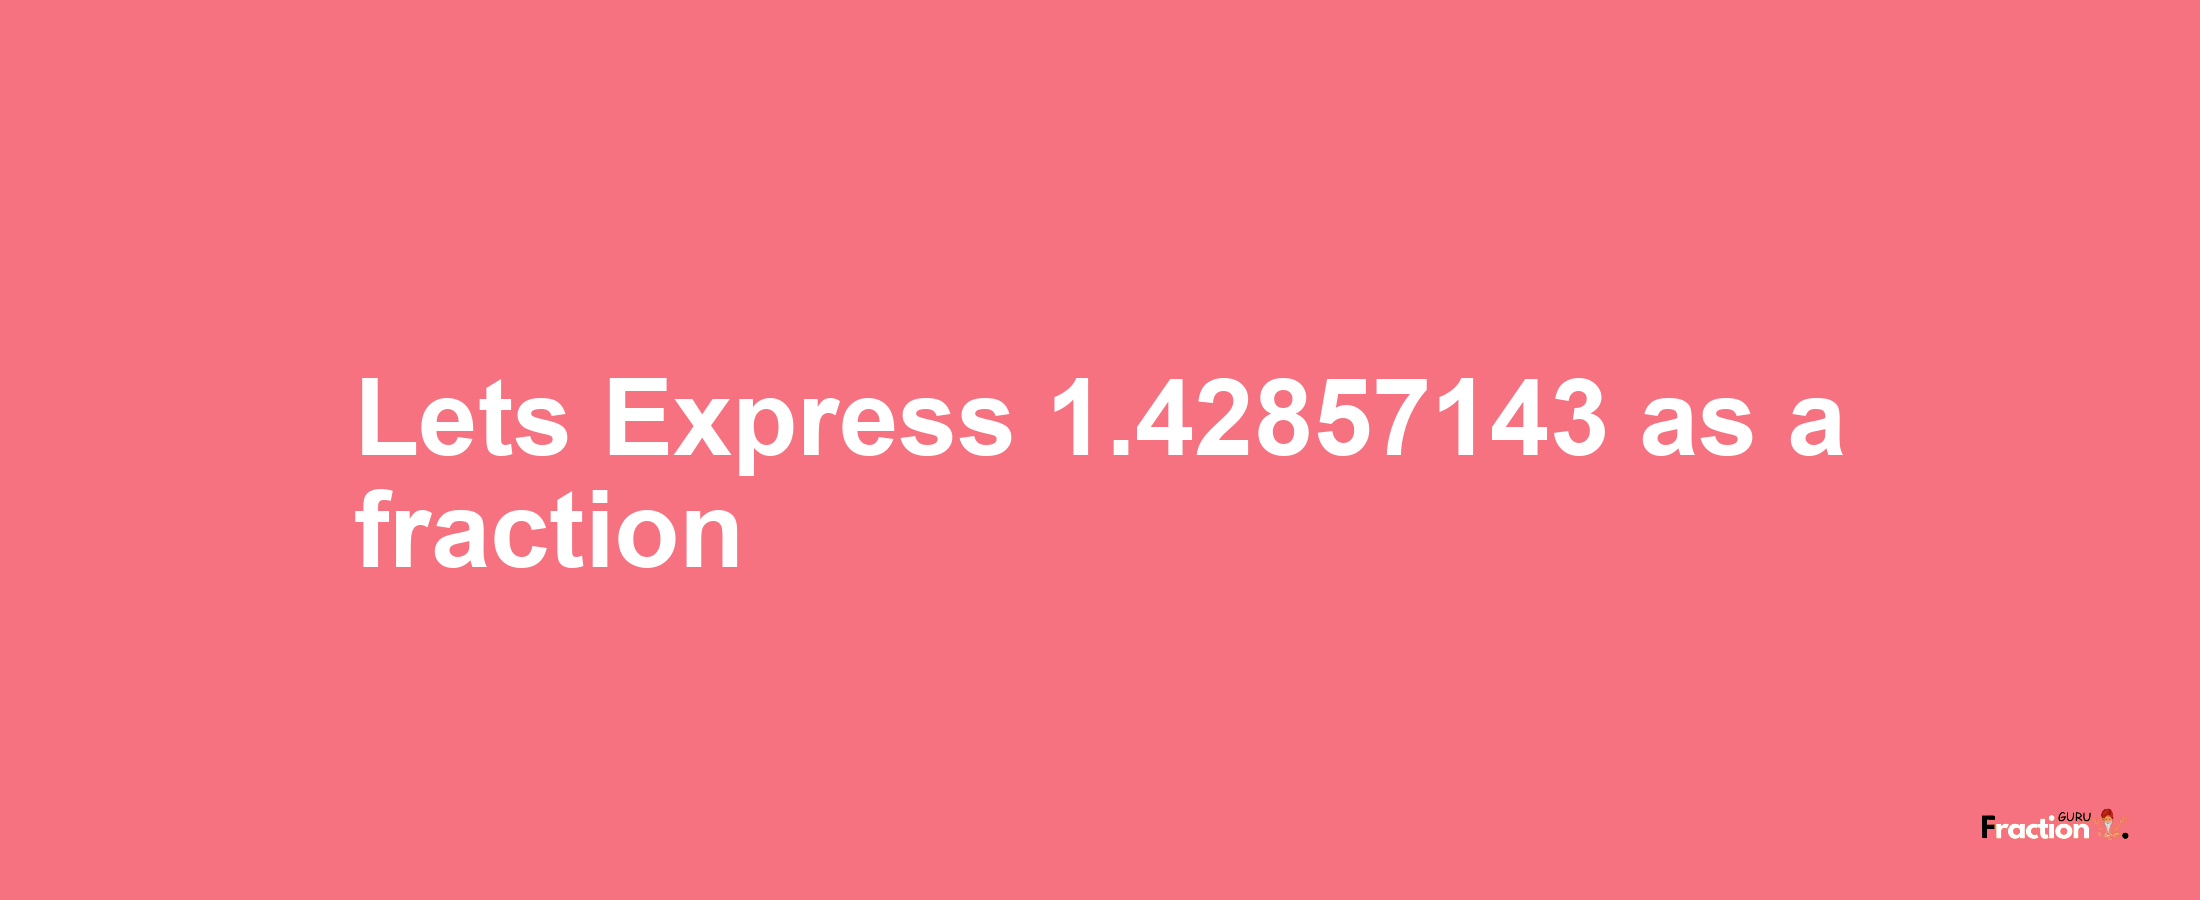 Lets Express 1.42857143 as afraction